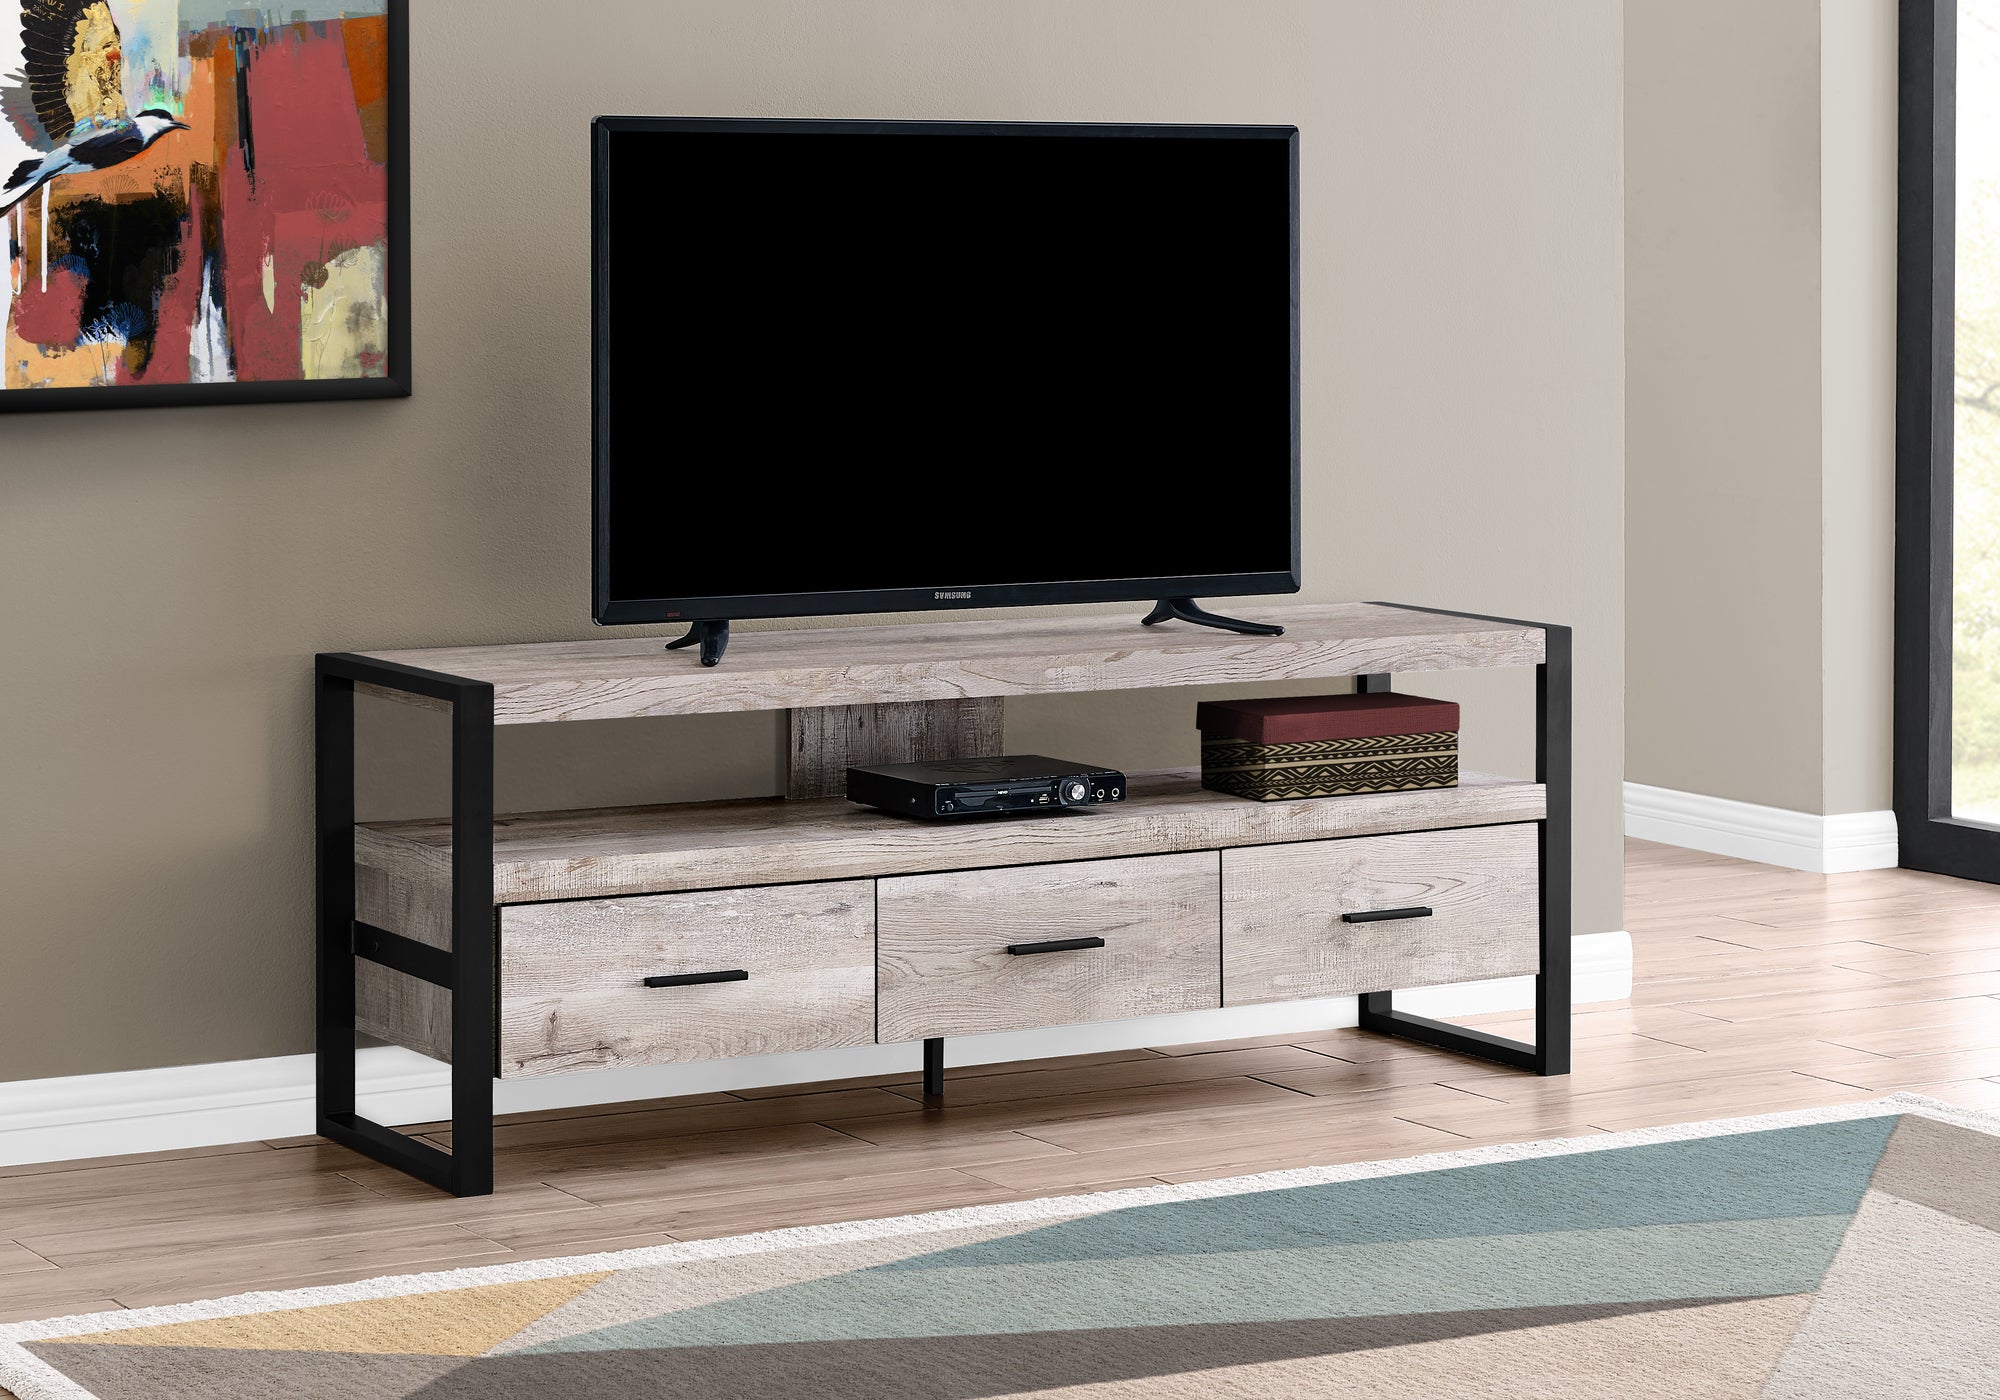 I 2822 - TV STAND - 60"L / TAUPE RECLAIMED WOOD-LOOK / 3 DRAWERS BY MONARCH SPECIALTIES INC